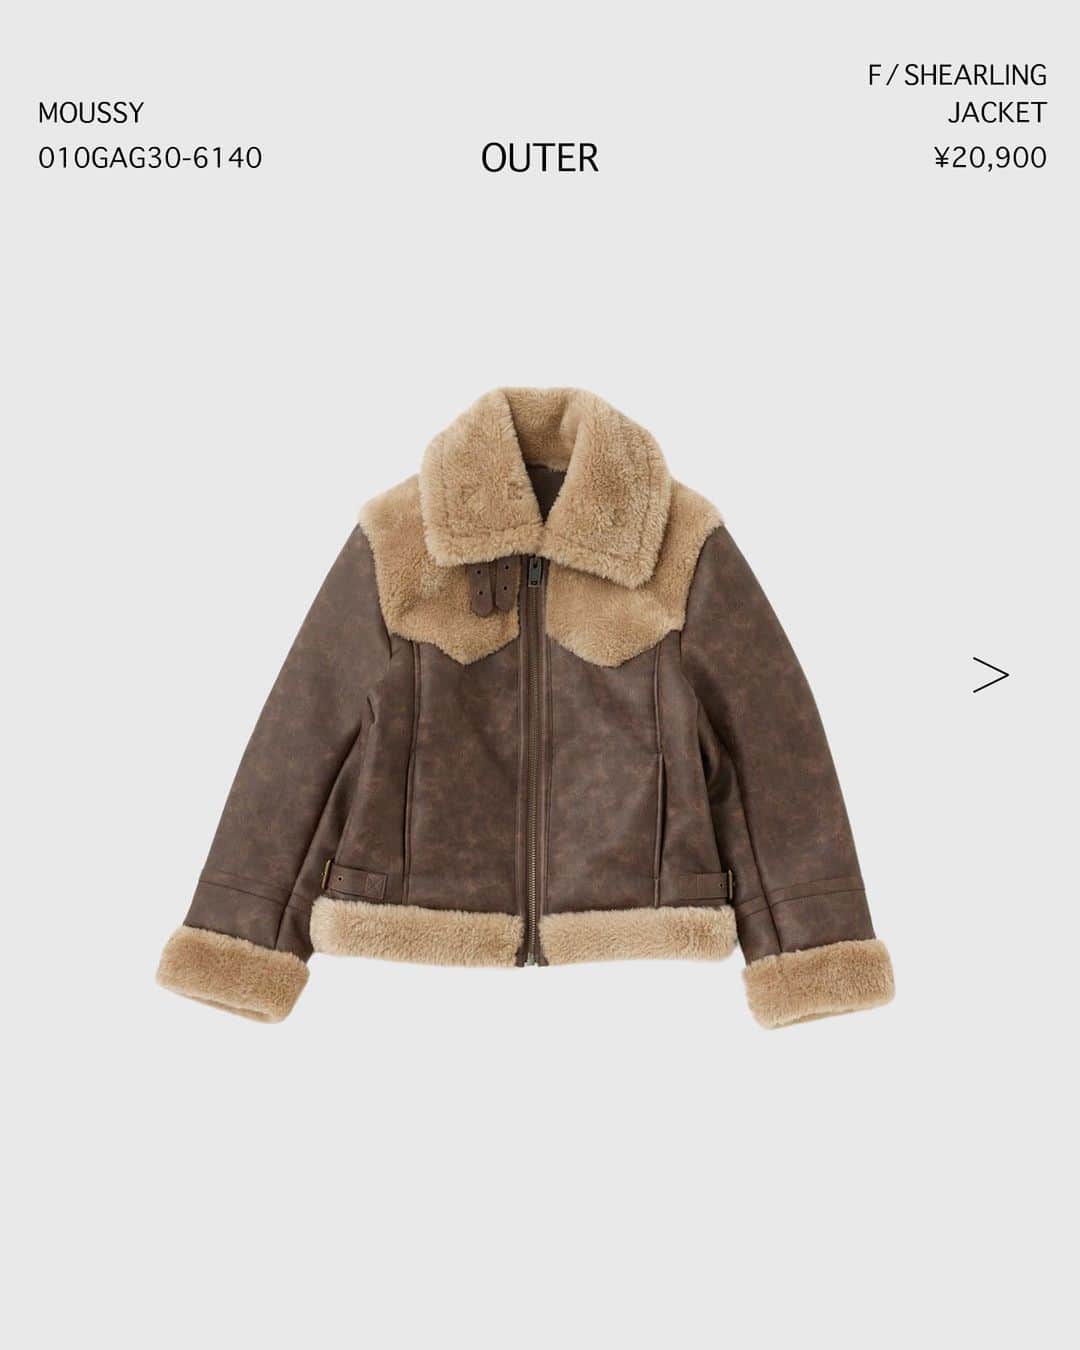 SHEL'TTER WEB STOREのインスタグラム：「【NEW IN】 - OUTER -  ━━━━━━━━━━━━━━━━  【MOUSSY】F/SHEARLING ジャケット ¥20,900 tax in Size：FREE Color：BRN,BLK No：010GAG30-6140 ※発売中  【SLY】WOOL BLEND OVER MIDI コート ¥18,997 tax in Size：FREE Color：M/BLU,M/GRN,D/GRY No：030GAY30-1040 ※発売中  【MOUSSY】LAYERED DESIGN ロングコート ¥22,990 tax in Size：1,2 Color：柄BEG,D/NVY,柄KHA No：010GA630-6300 ※発売中  気になるアイテムは画像をタップまたは  プロフィールのサイトURLをクリック✔  ━━━━━━━━━━━━━━━━  #SHELTTERWEBSTORE #SWS #MOUSSY #SLY #newin #2023AW #outer #jacket #coat  #新作 #アウター #ジャケット #コート #ロングコート #ボアジャケット #レザージャケット #オーバーサイズ #レイヤード風」